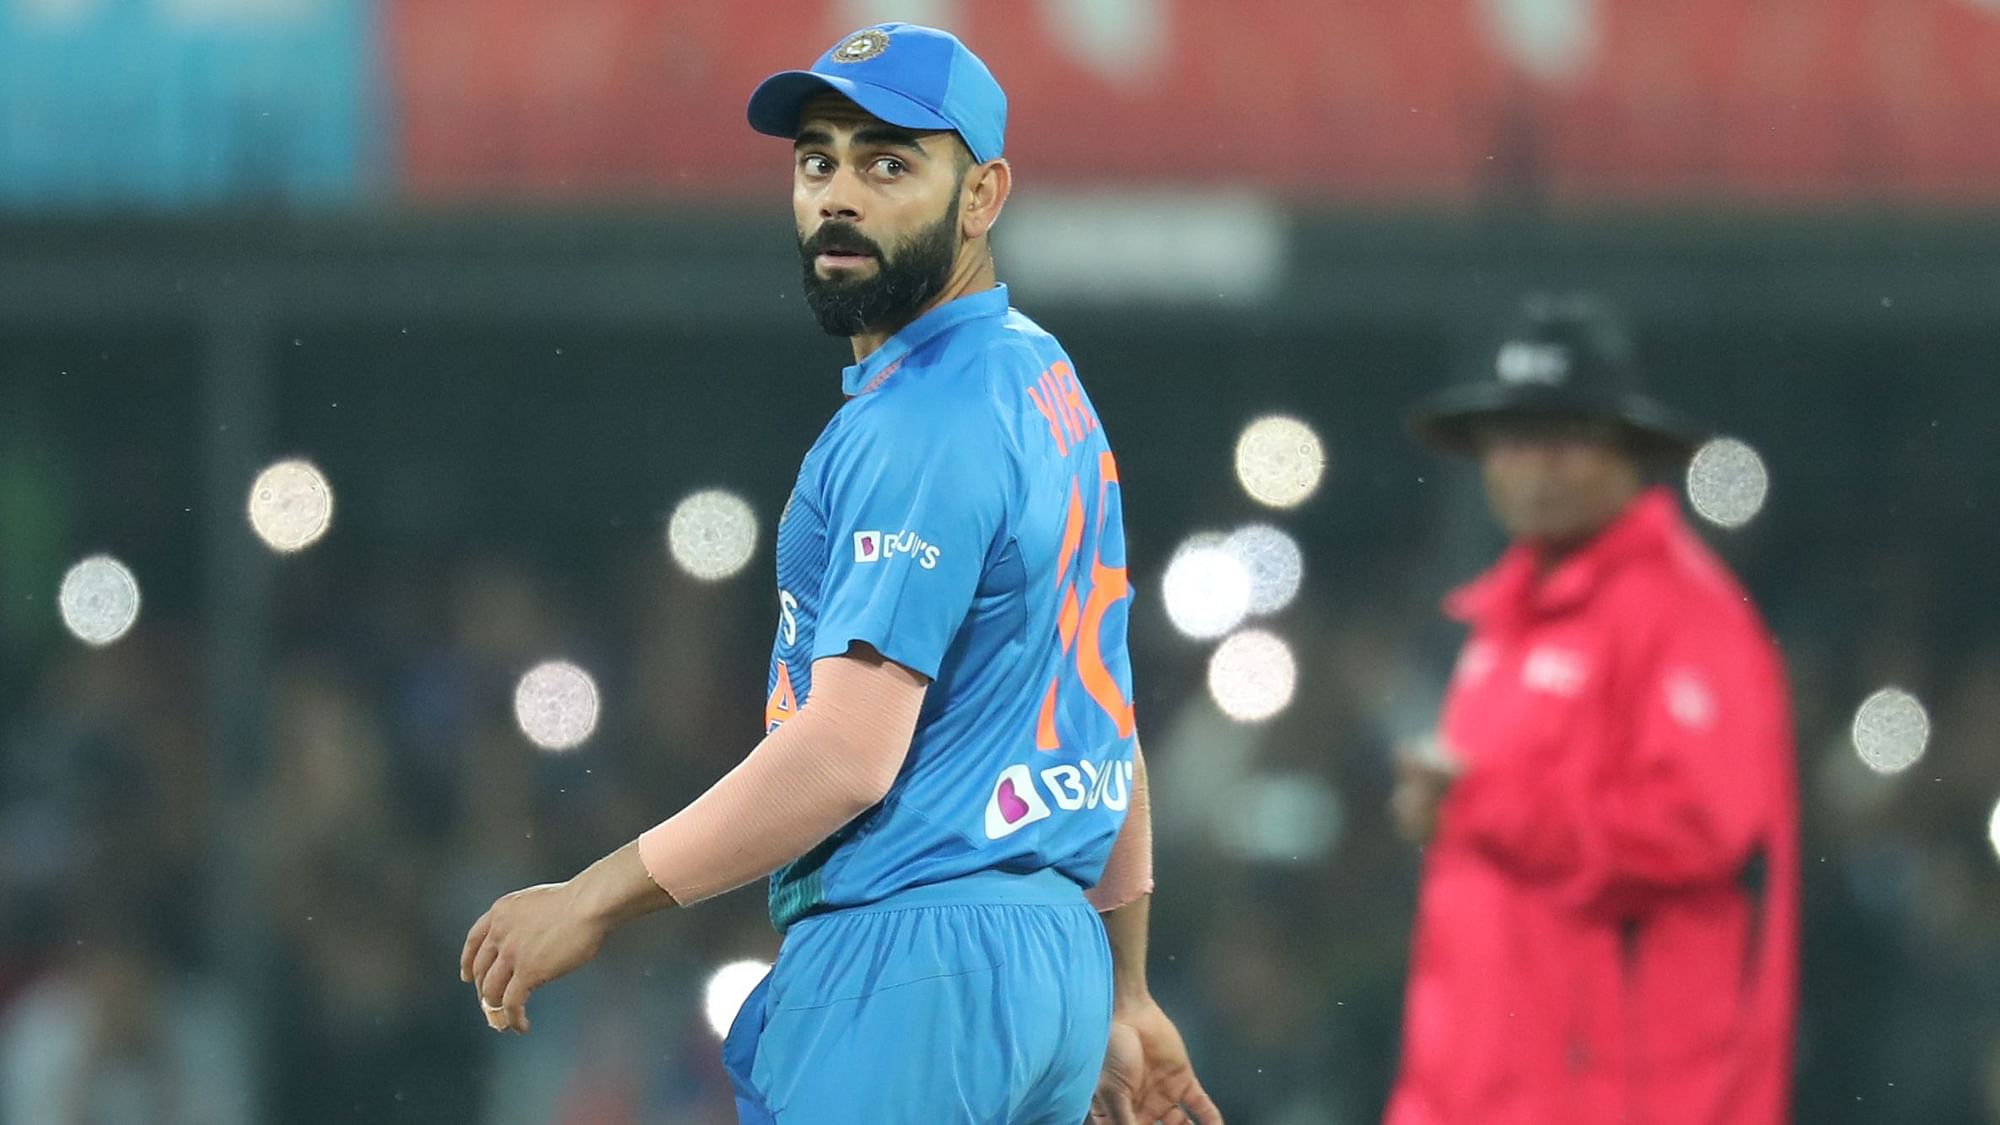 India captain Virat Kohli has said that as a leader of his team, his focus is to take the team forward and not worry too much about the results as they don’t always determine the leadership qualities of a person.